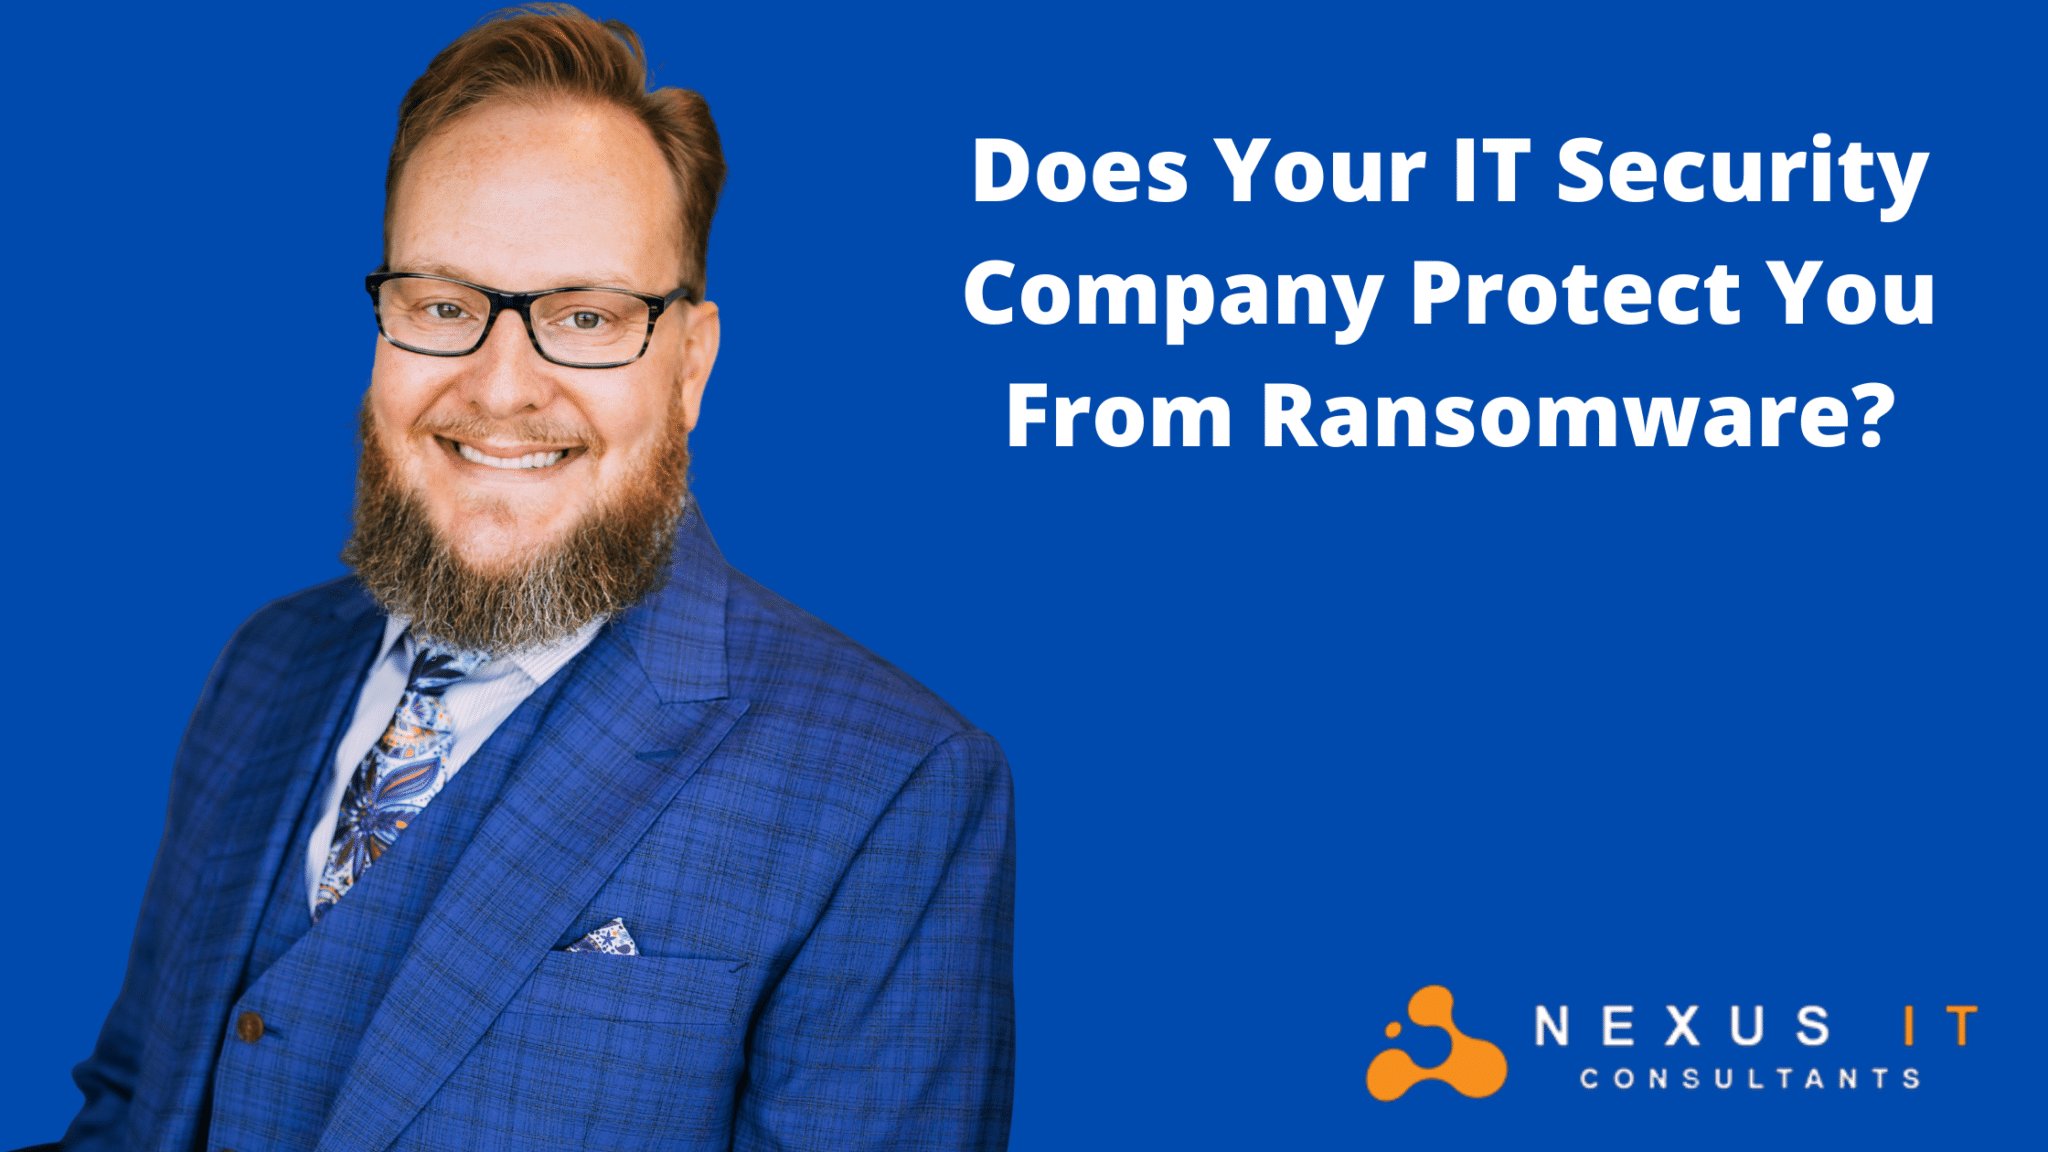 Does Your IT Security Company Protect You From Ransomware?